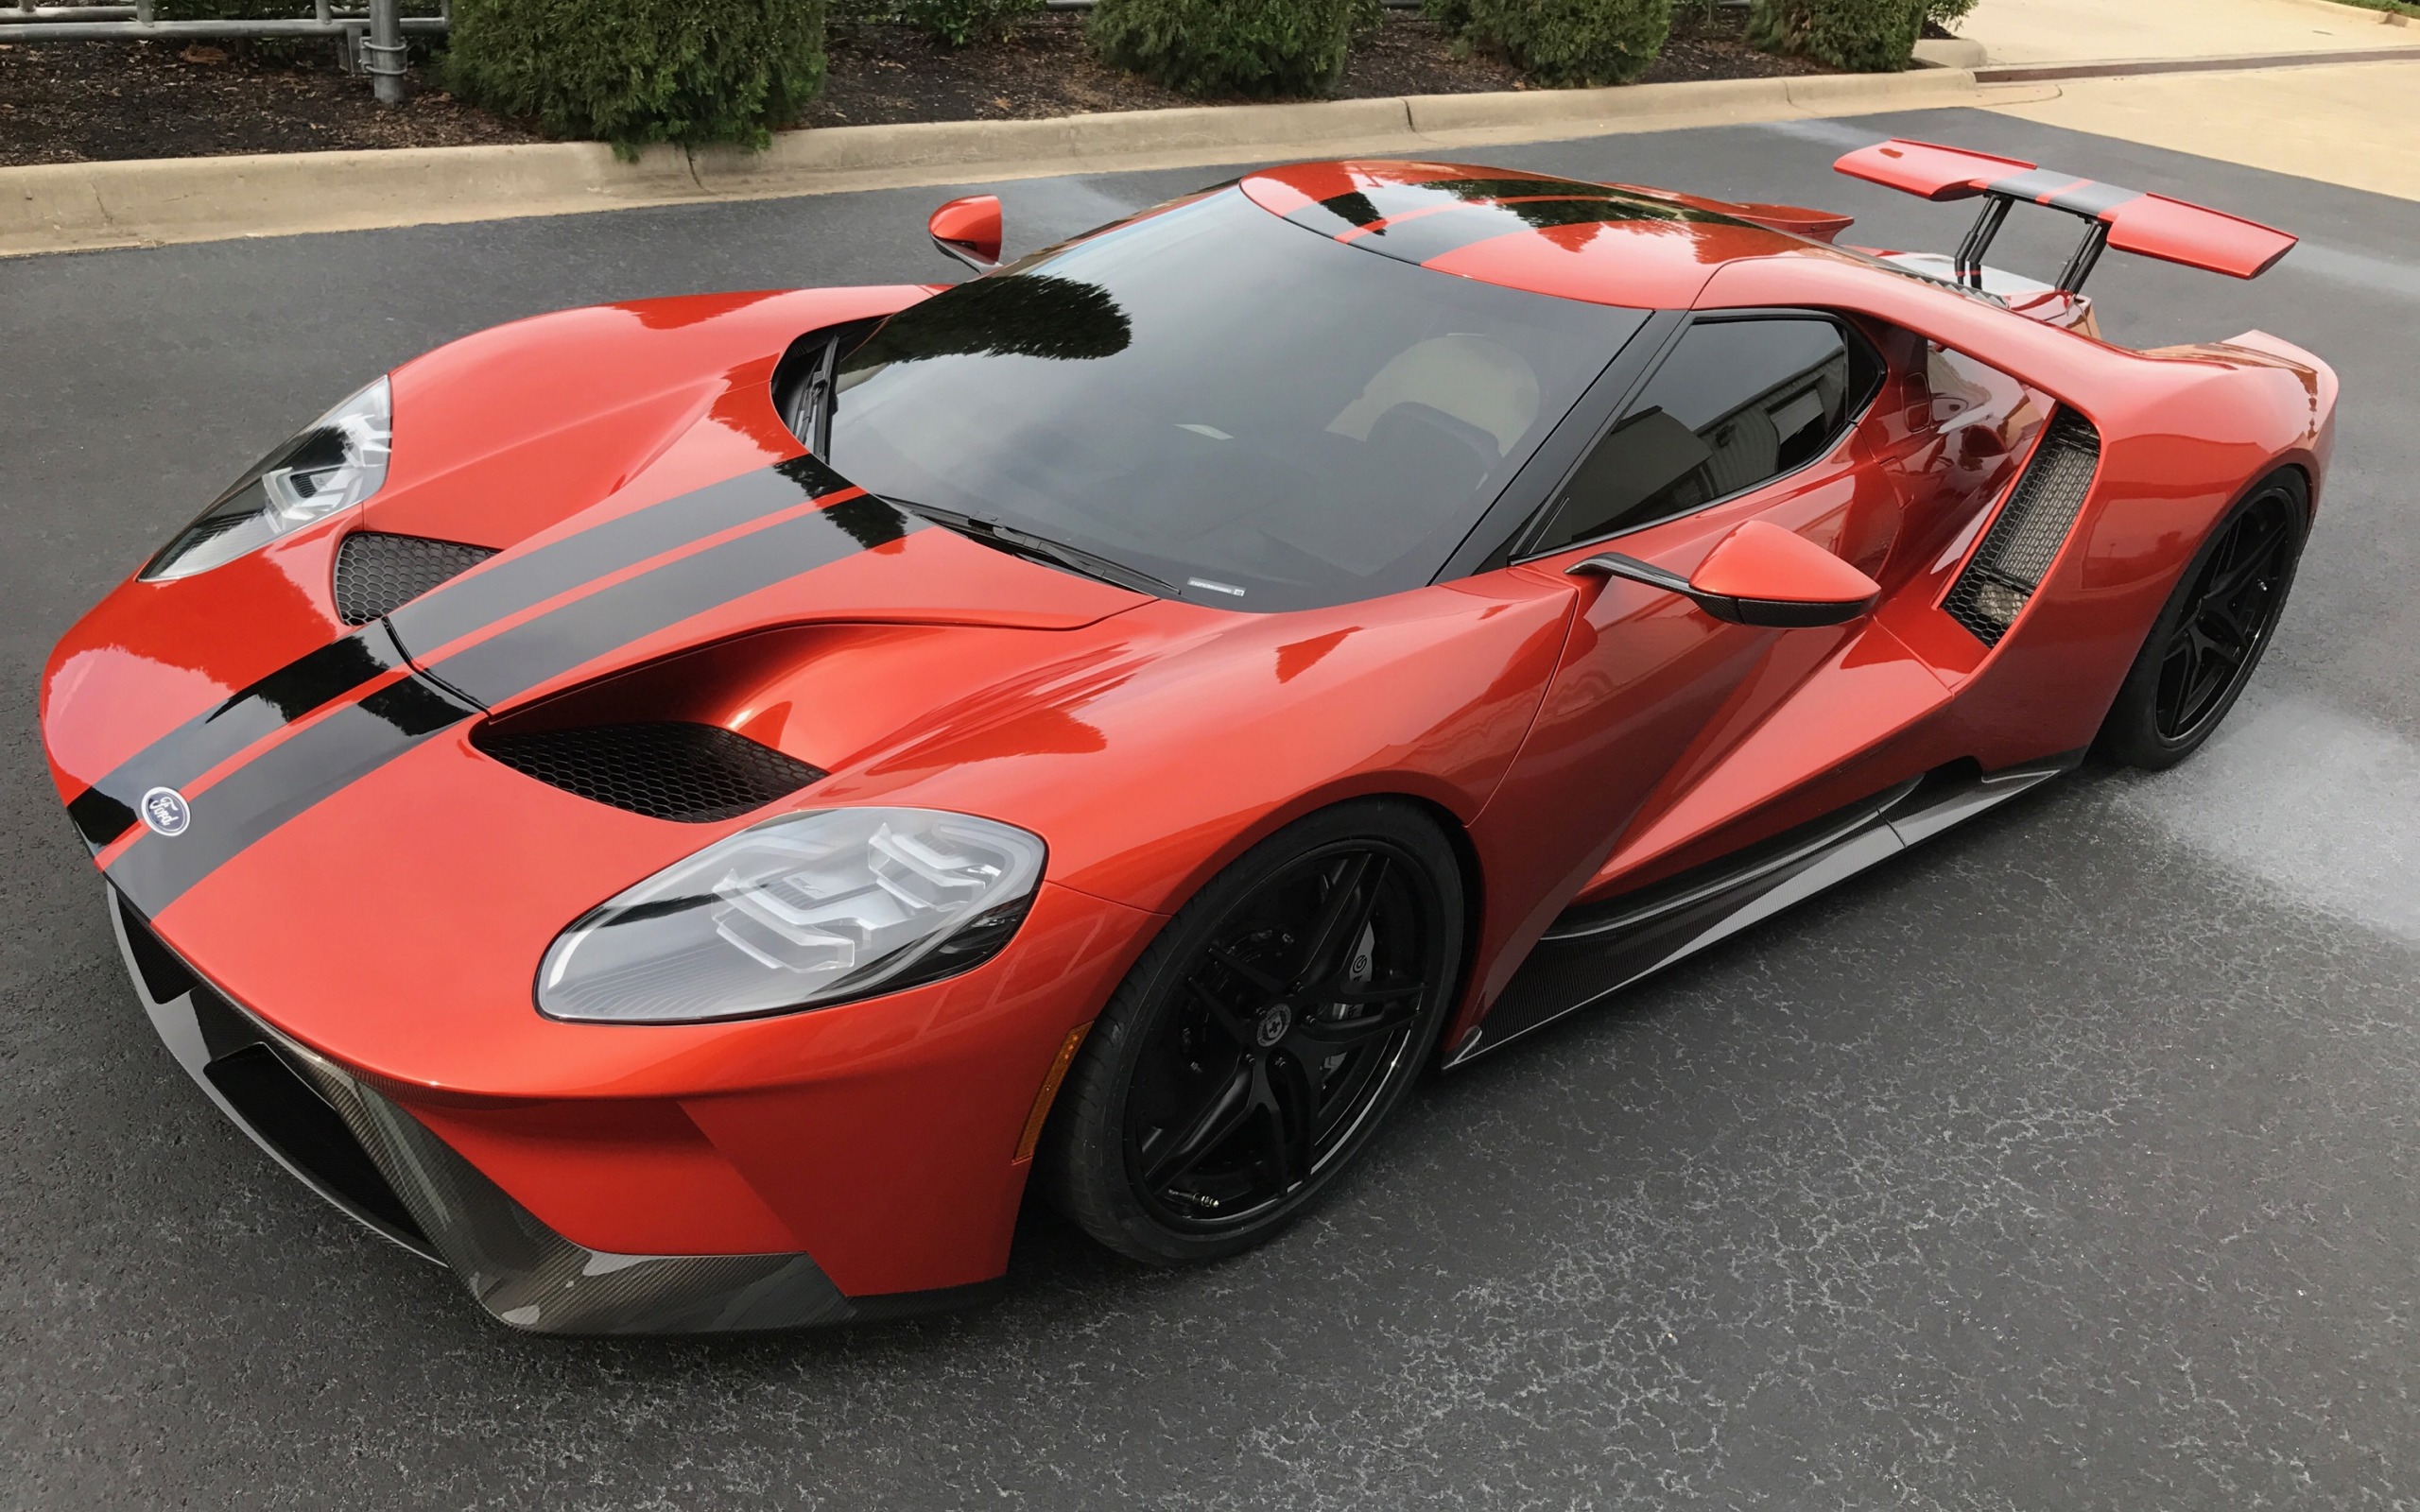 Ford Gt, 2017, Hre Wheels, Sports Car, Supercar, Red - Ford Gt 2017 Tuning - HD Wallpaper 